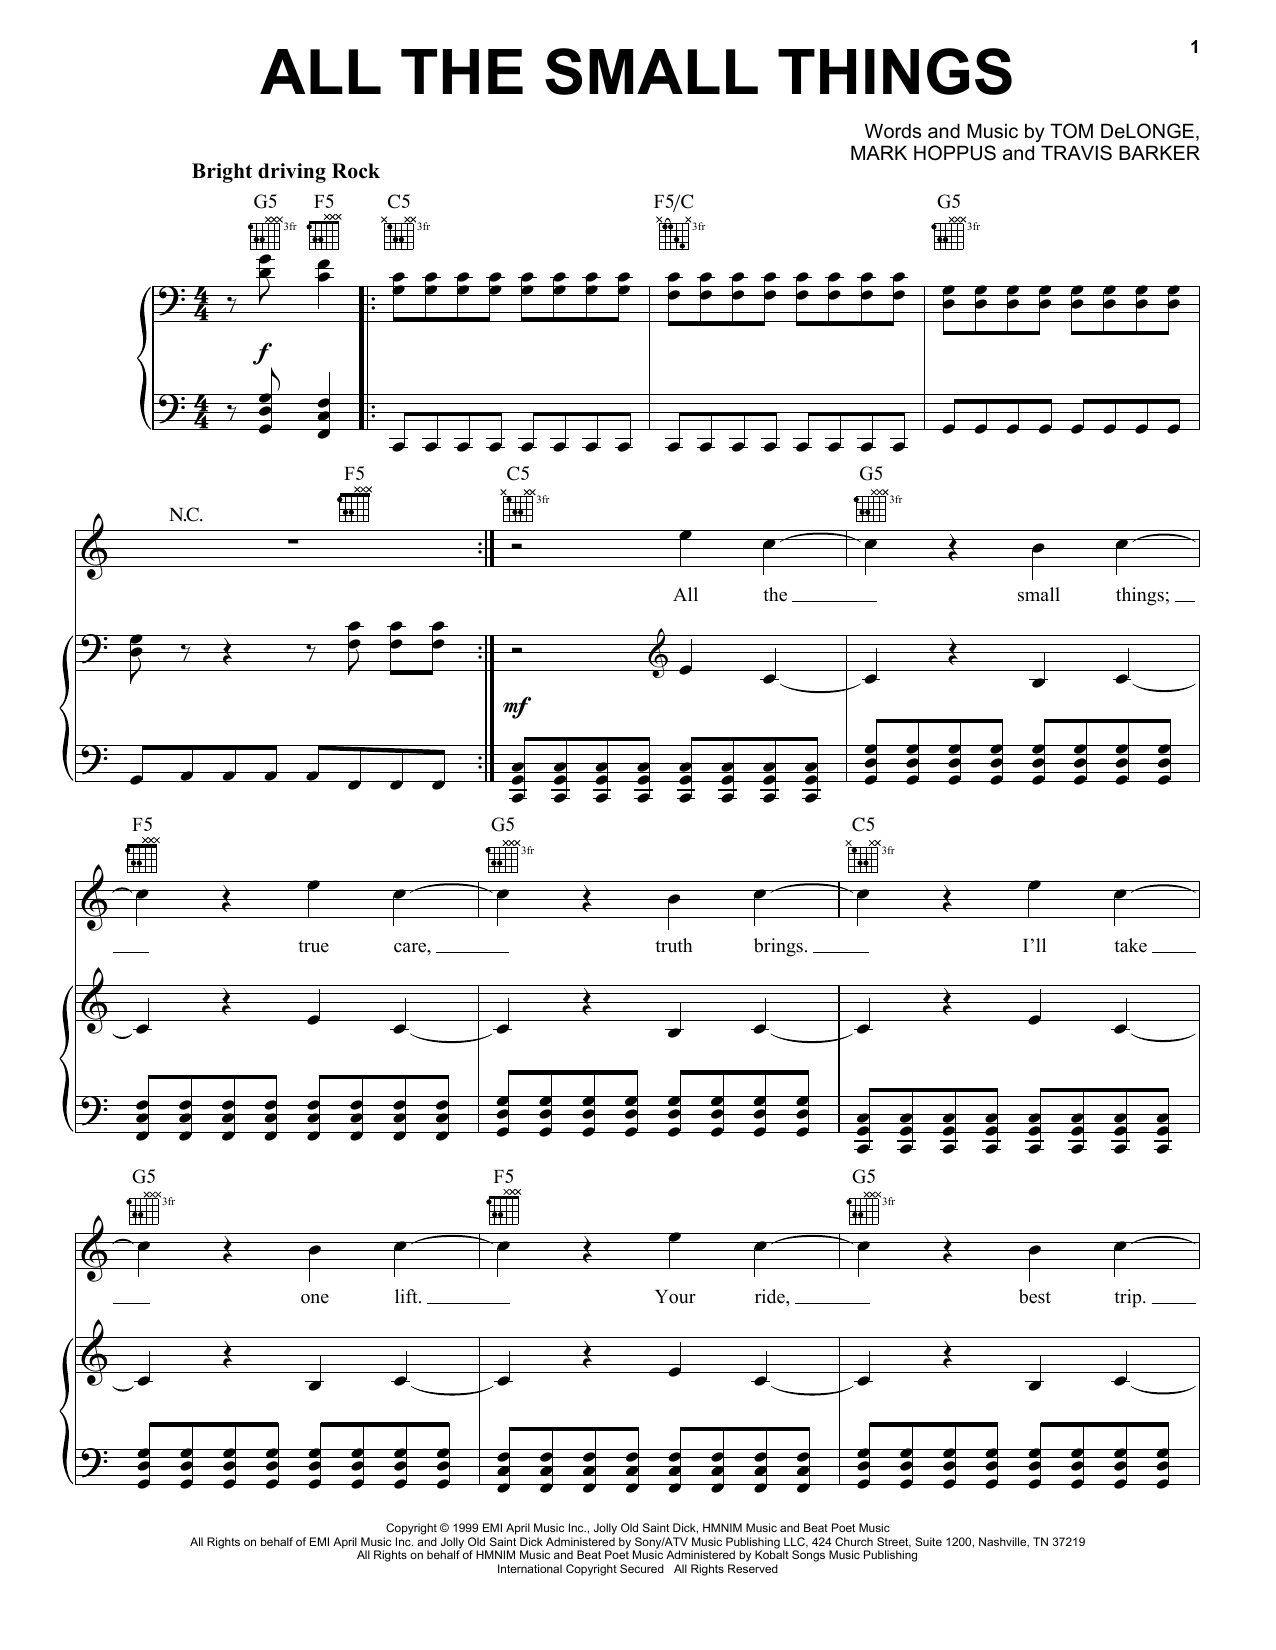 Blink 182 All The Small Things sheet music notes and chords. Download Printable PDF.